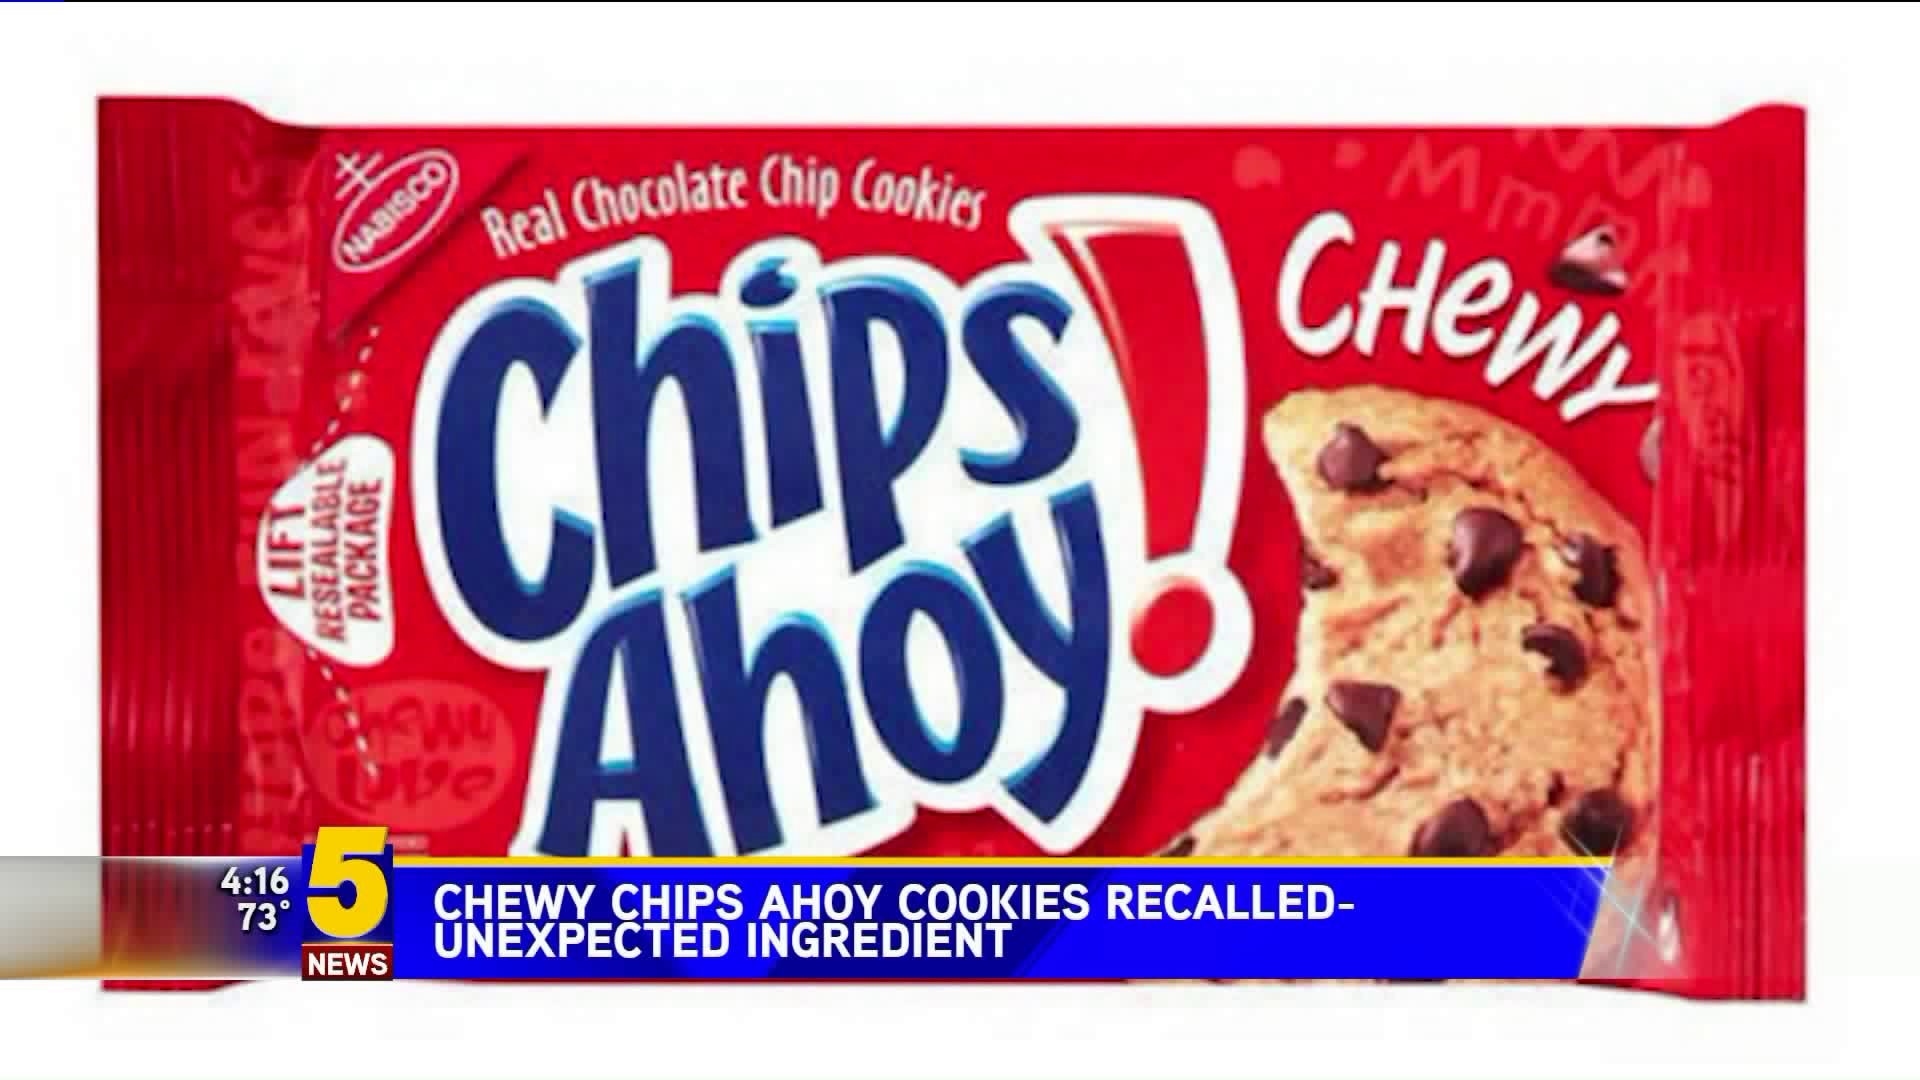 Chewy Chips Ahoy Cookies Recalled Due To Unexpected Ingredient